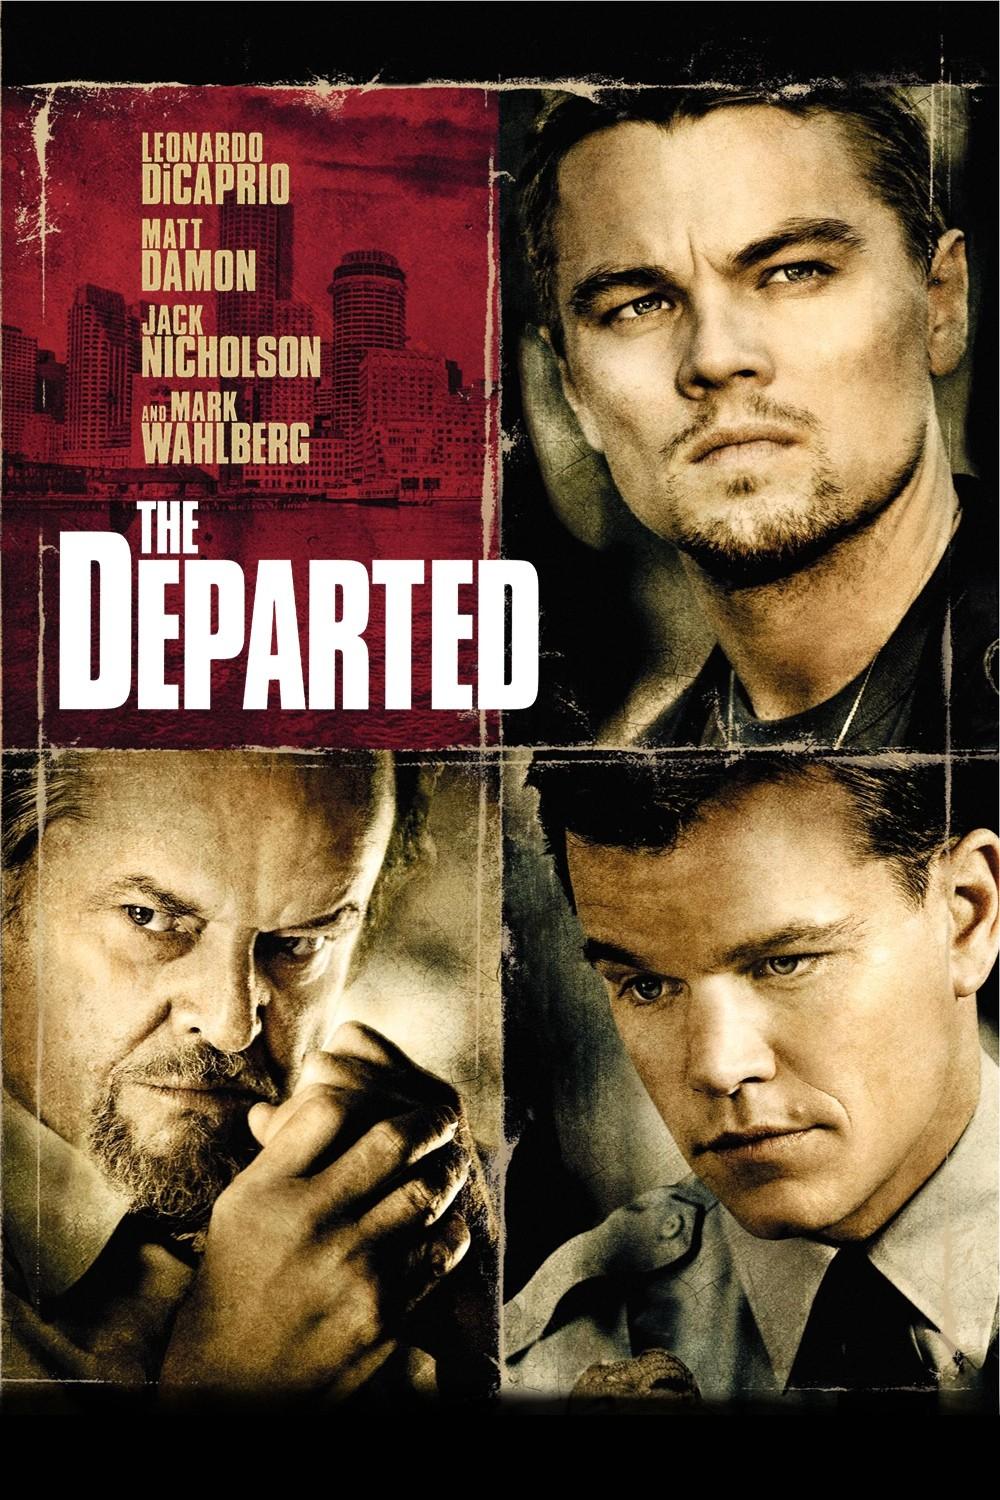 800x1200px The Departed 168.1 KB